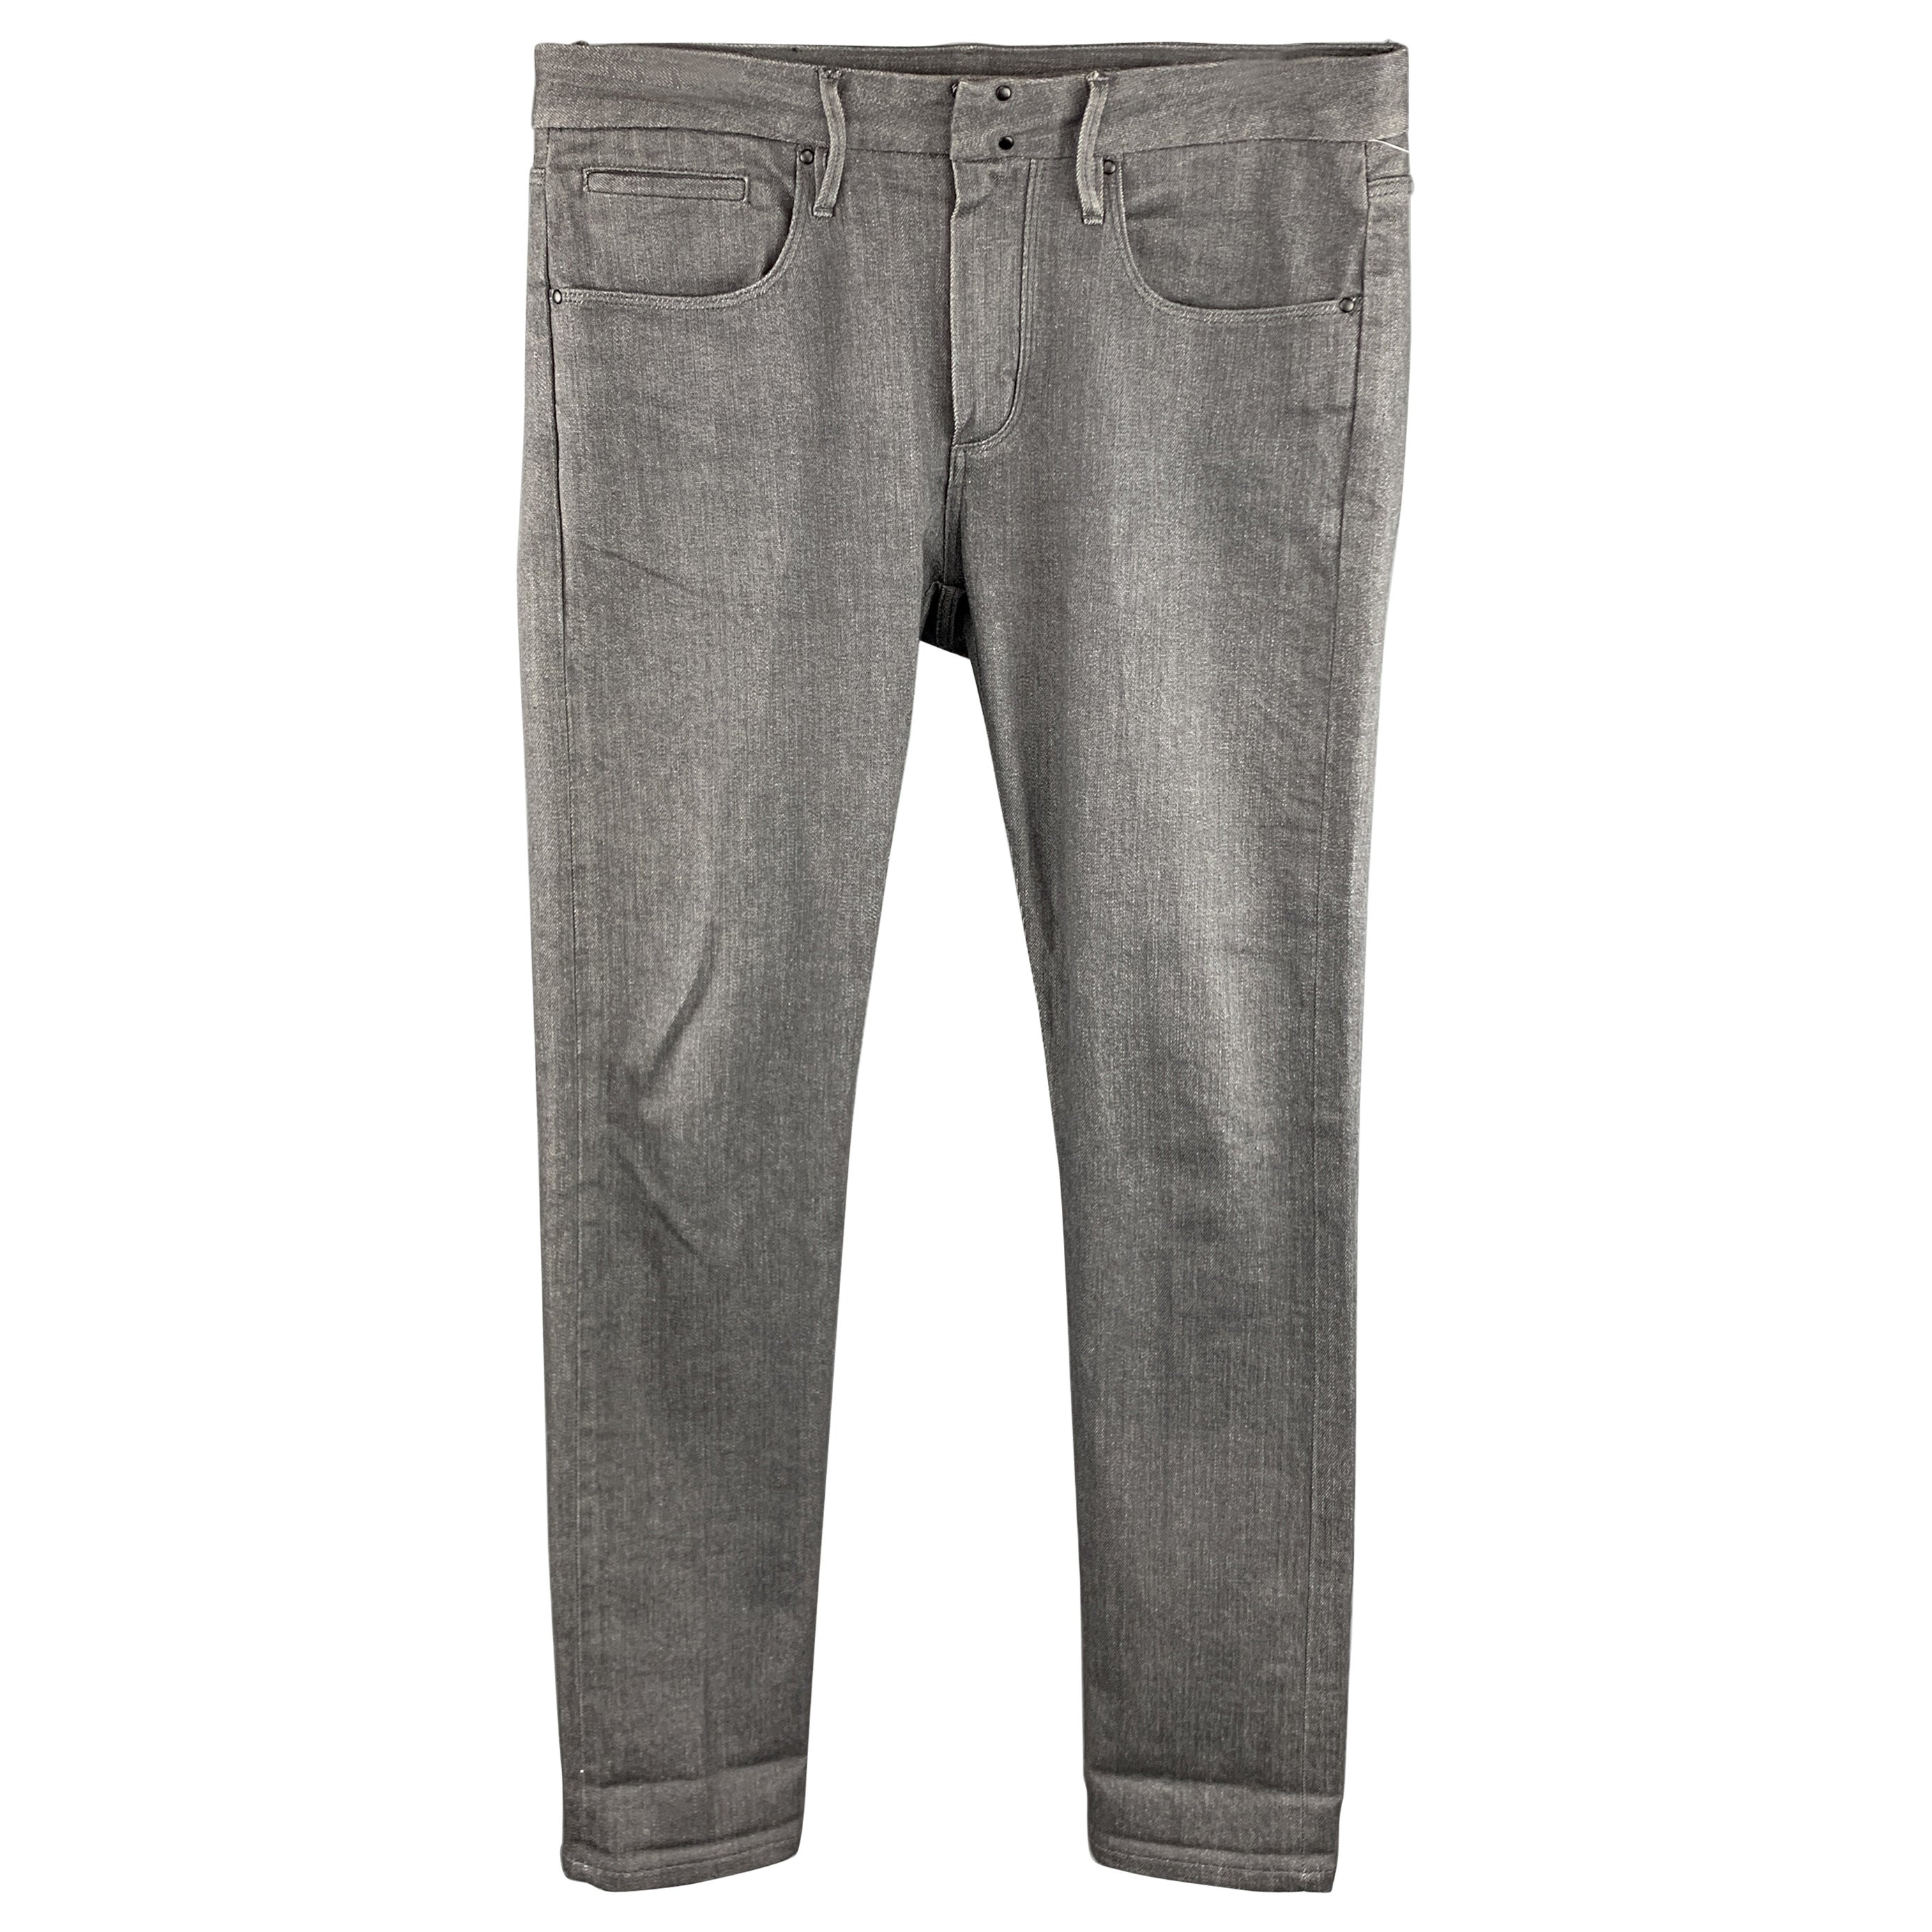 EMPORIO ARMANI Size 32 x 32 Charcoal Cotton Zip Fly Jeans For Sale